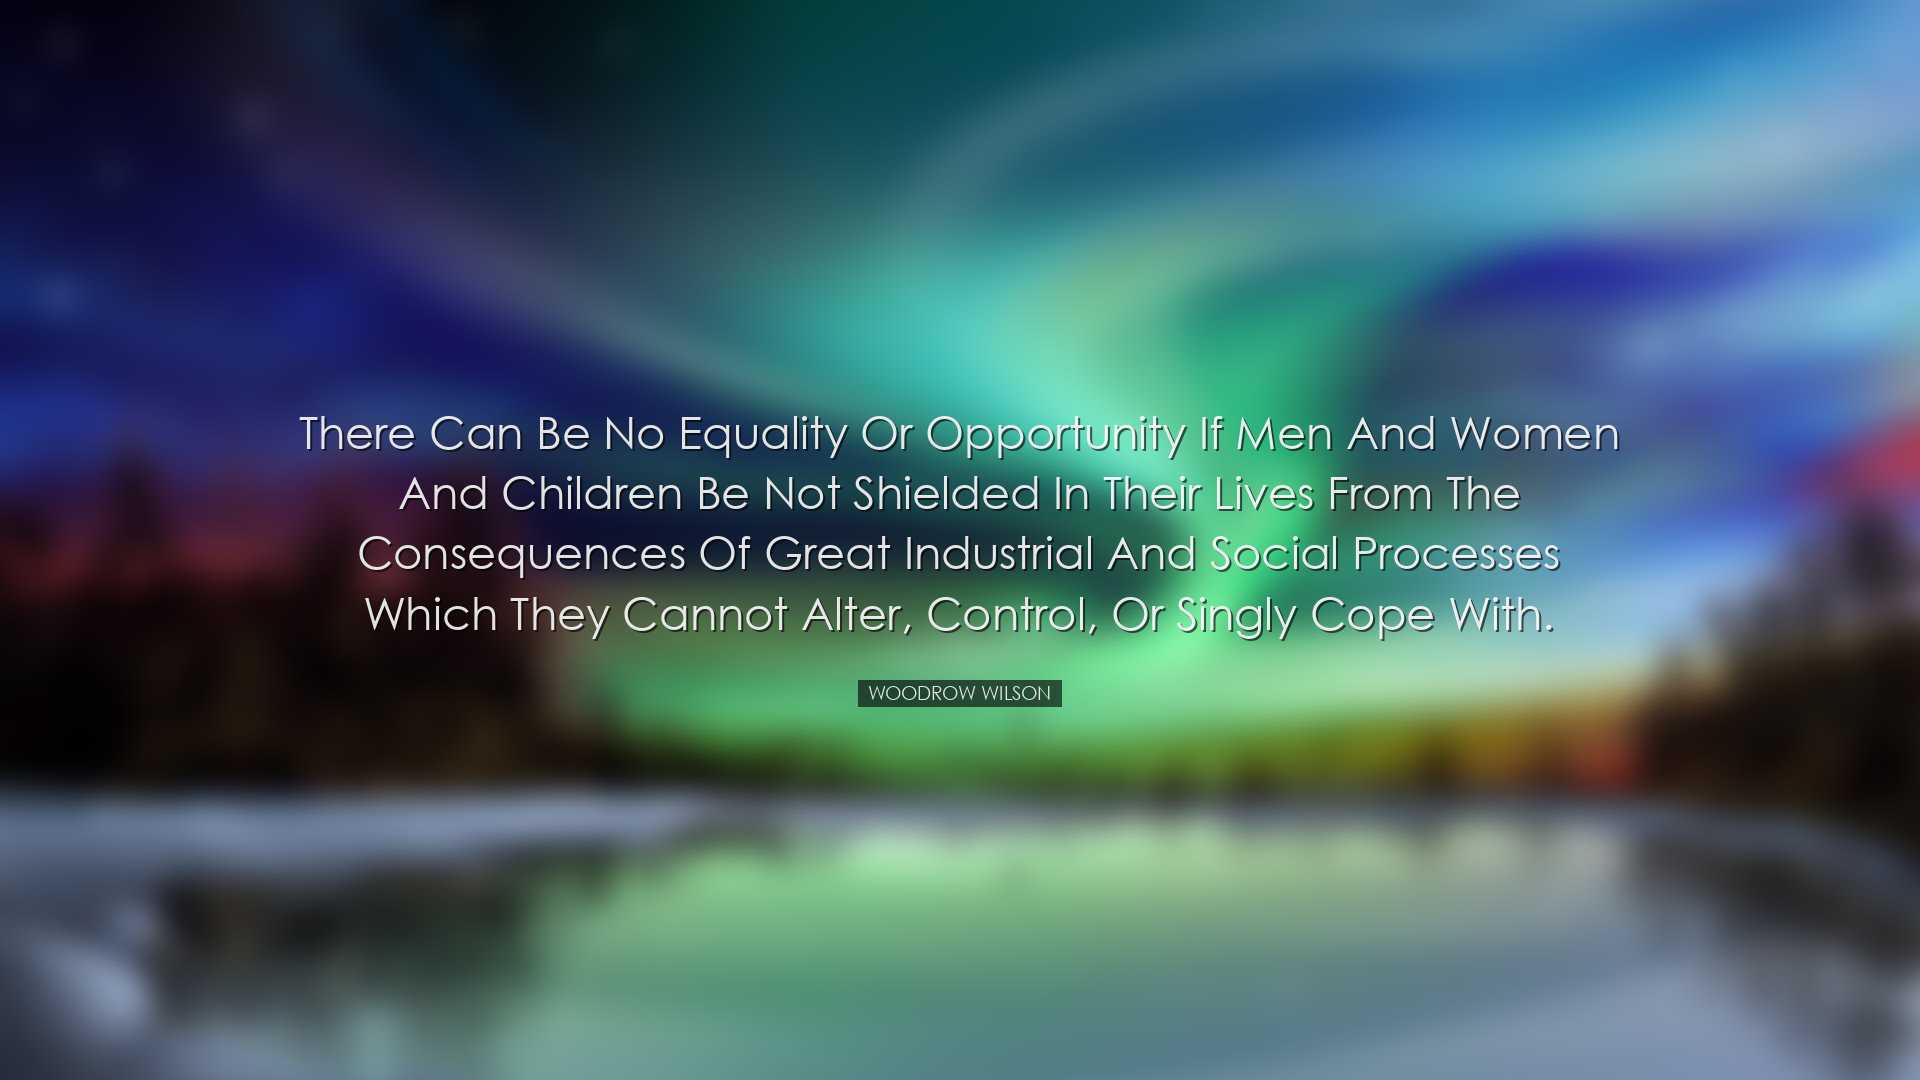 There can be no equality or opportunity if men and women and child